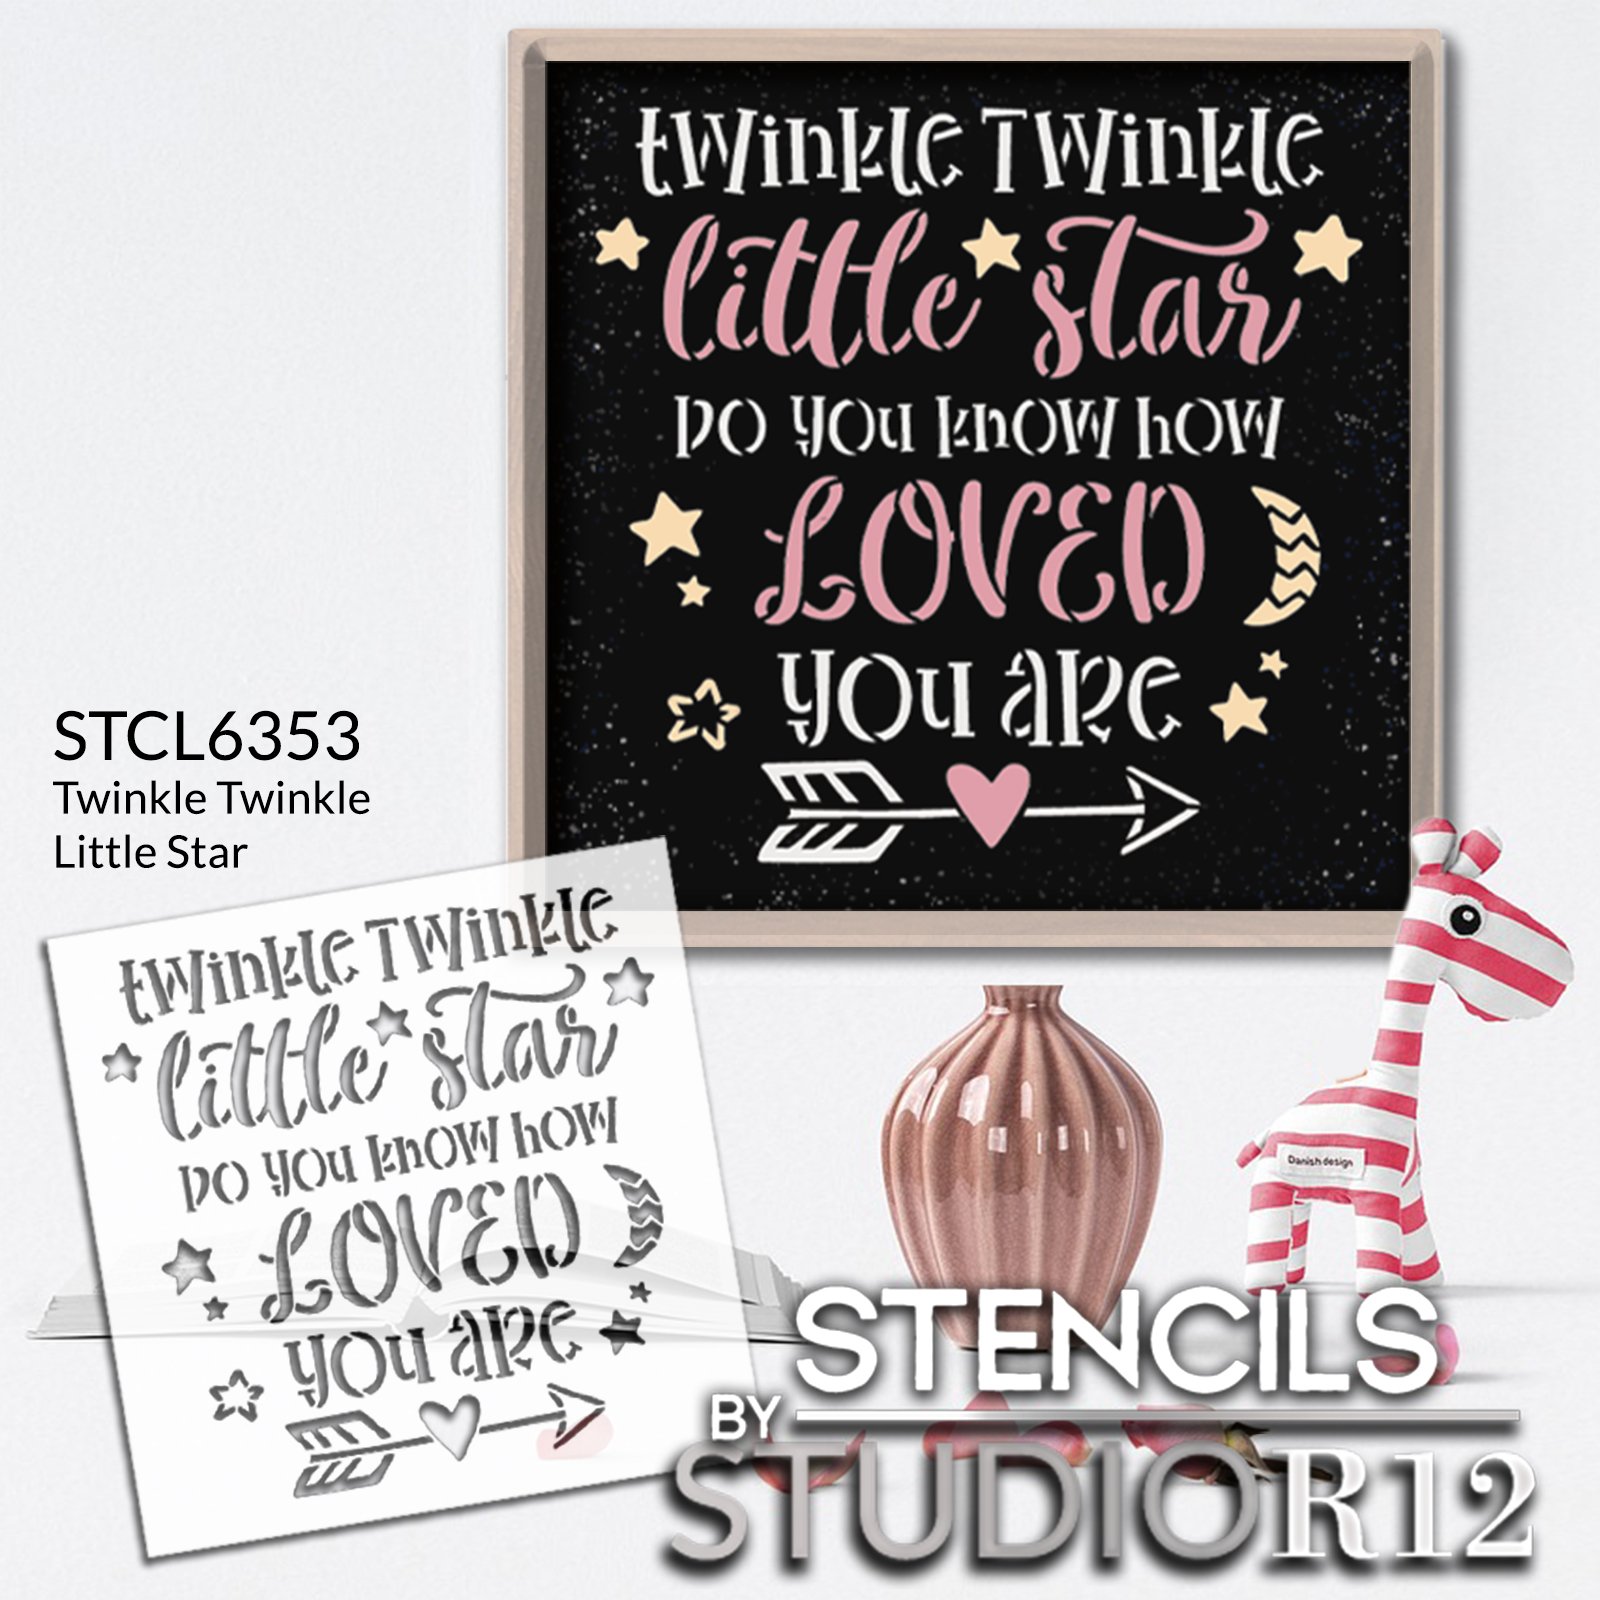 Twinkle Twinkle Little Star Stencil by StudioR12 | Craft DIY Children's Home Decor | Paint Nursery Wood Sign | Reusable Mylar Template | Select Size